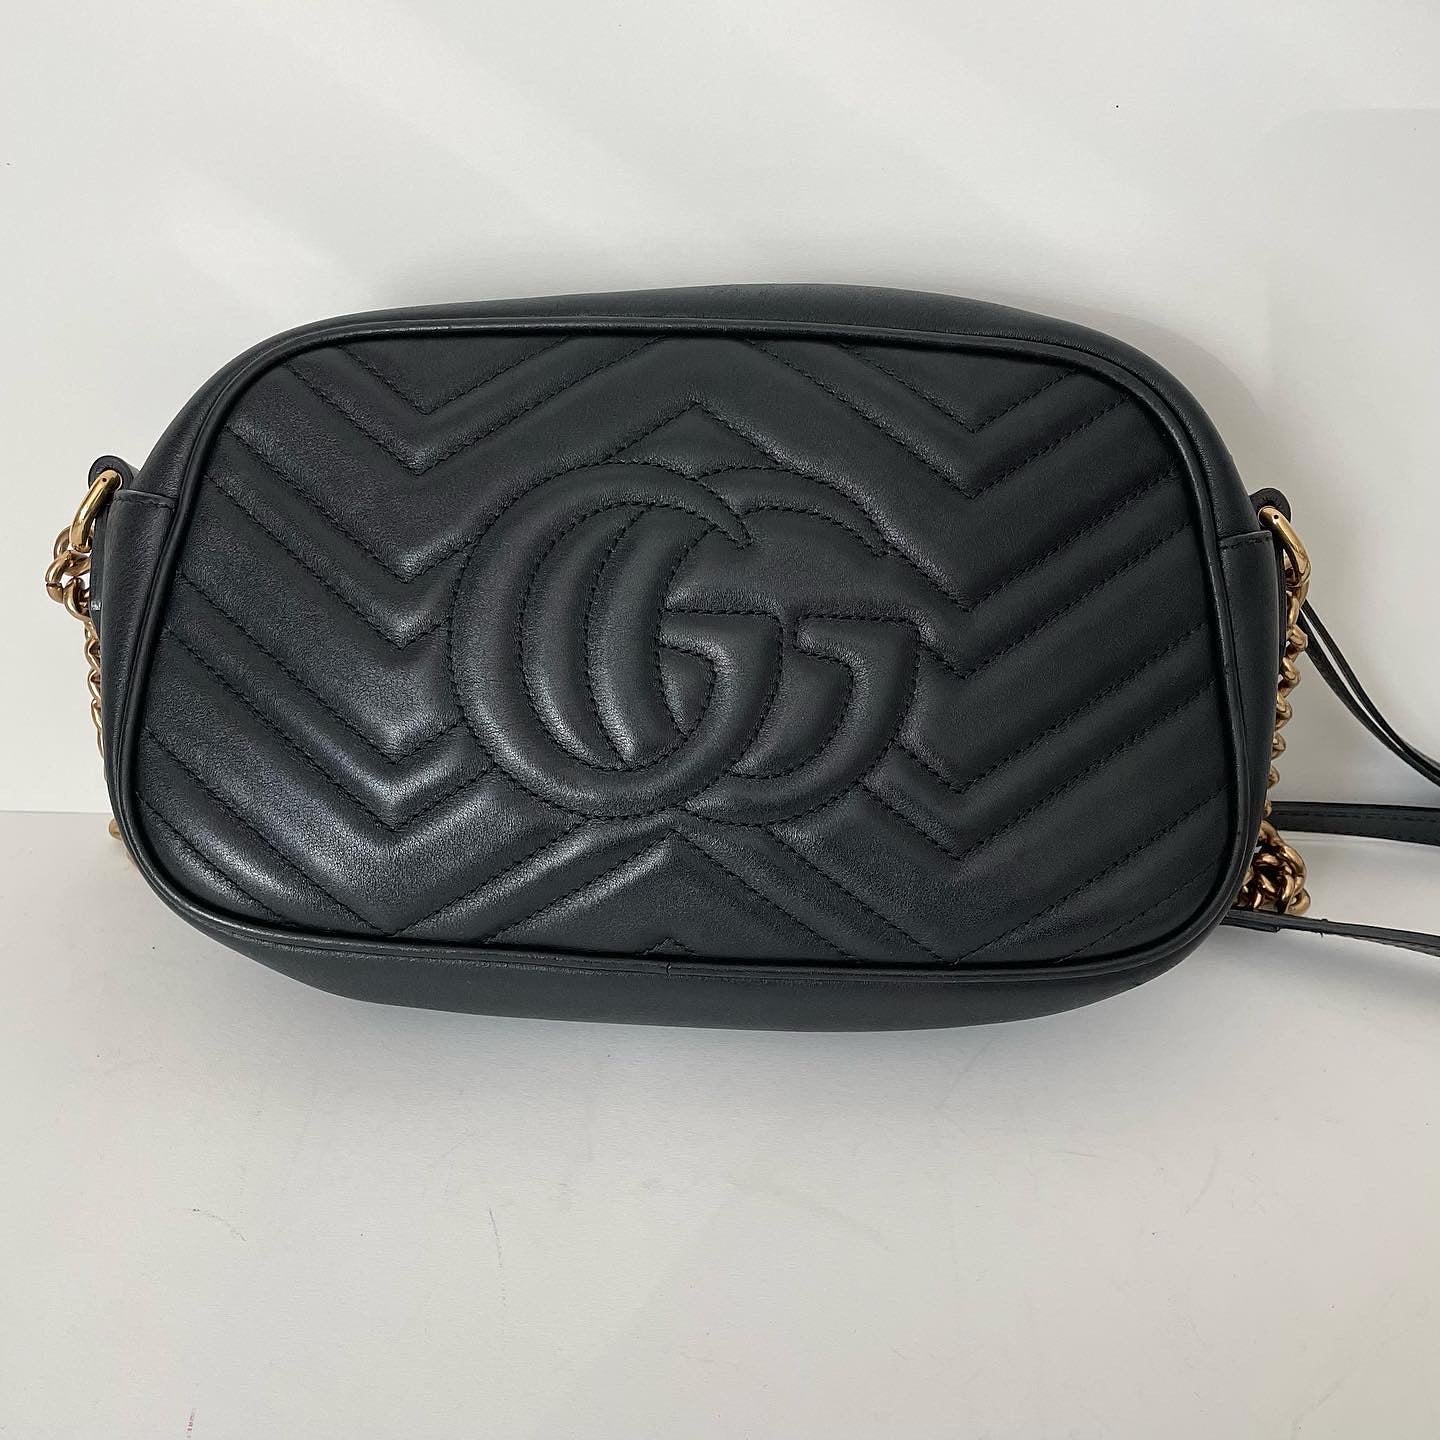 AUTHENTIC PRE-OWNED GUCCI MARMONT CAMERA BAG